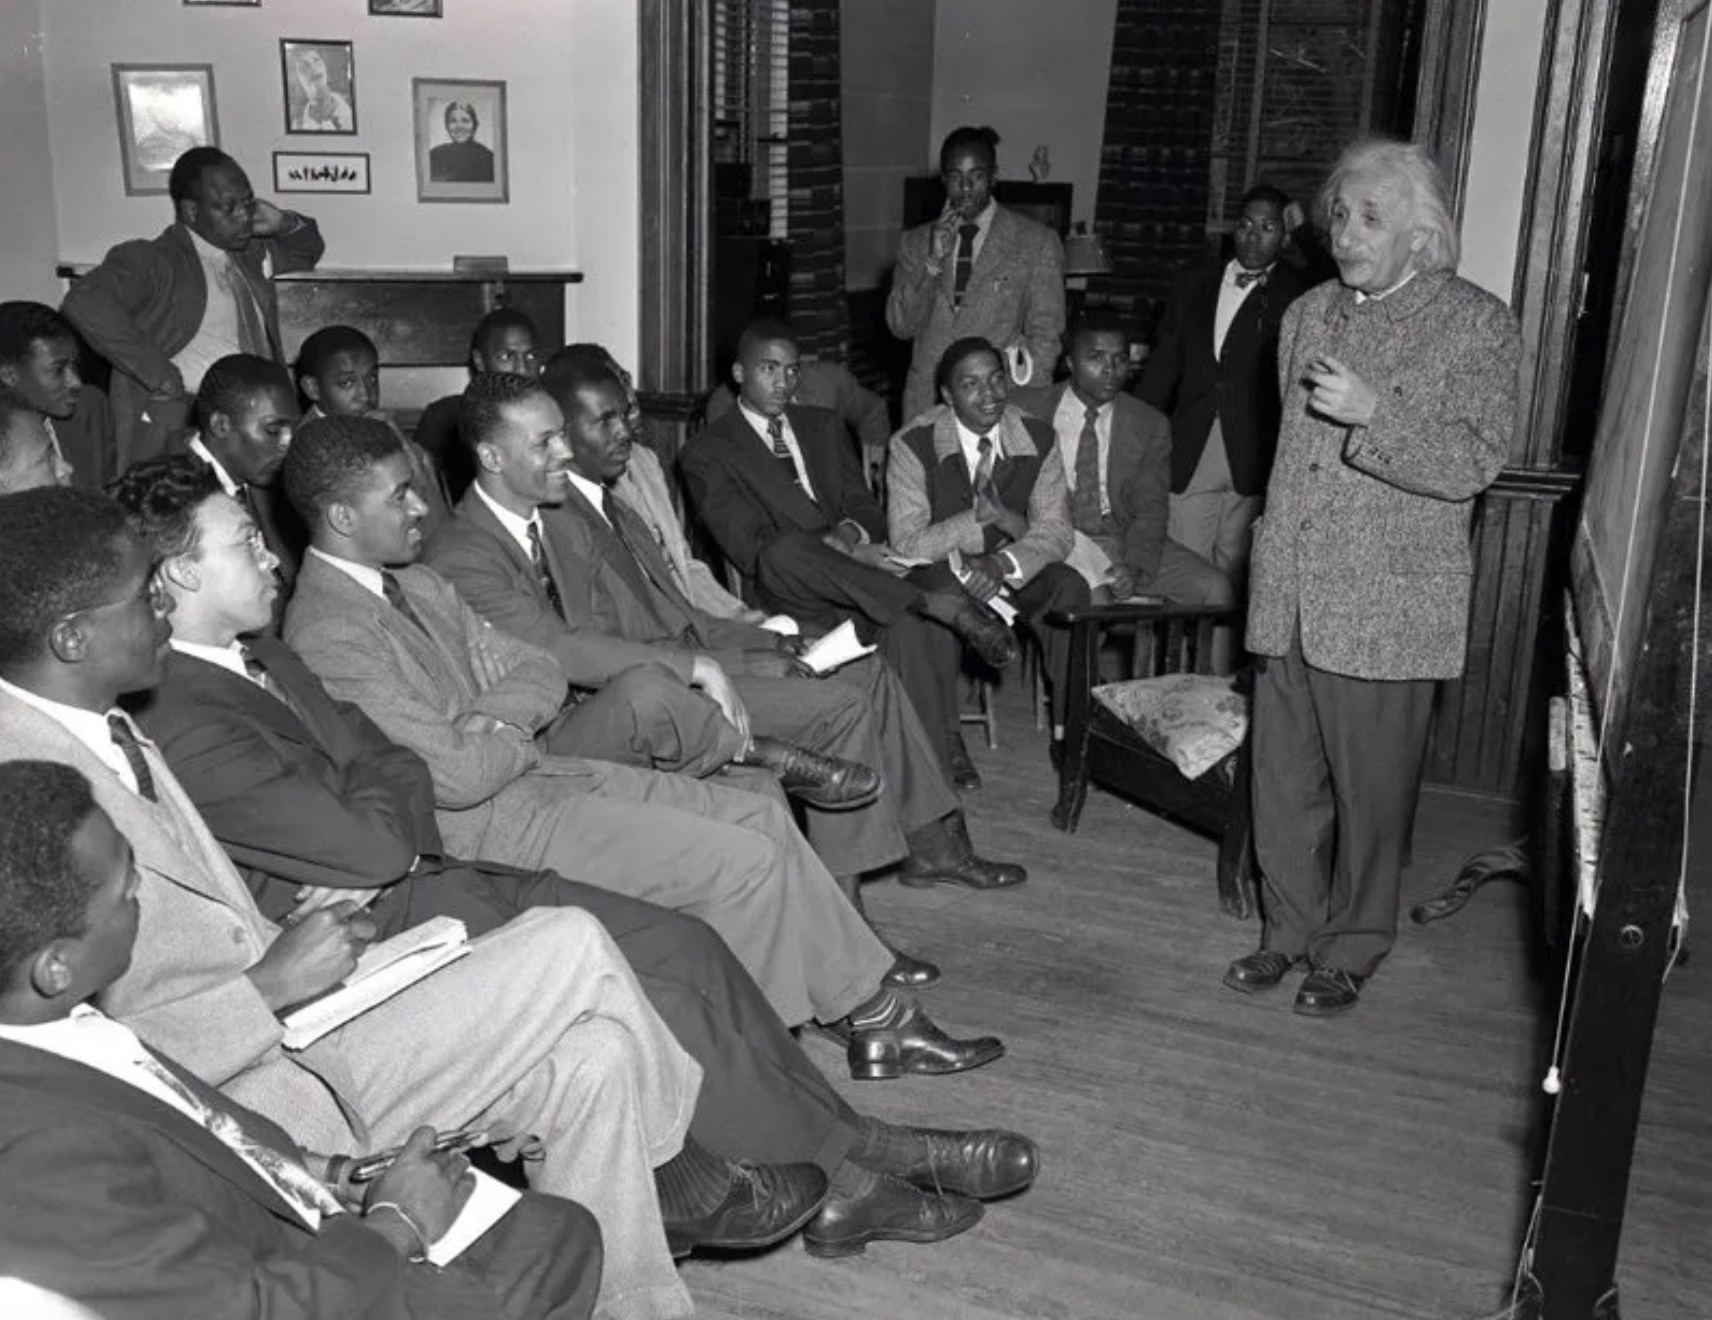 A man in a suit is giving a lecture to a group of people.